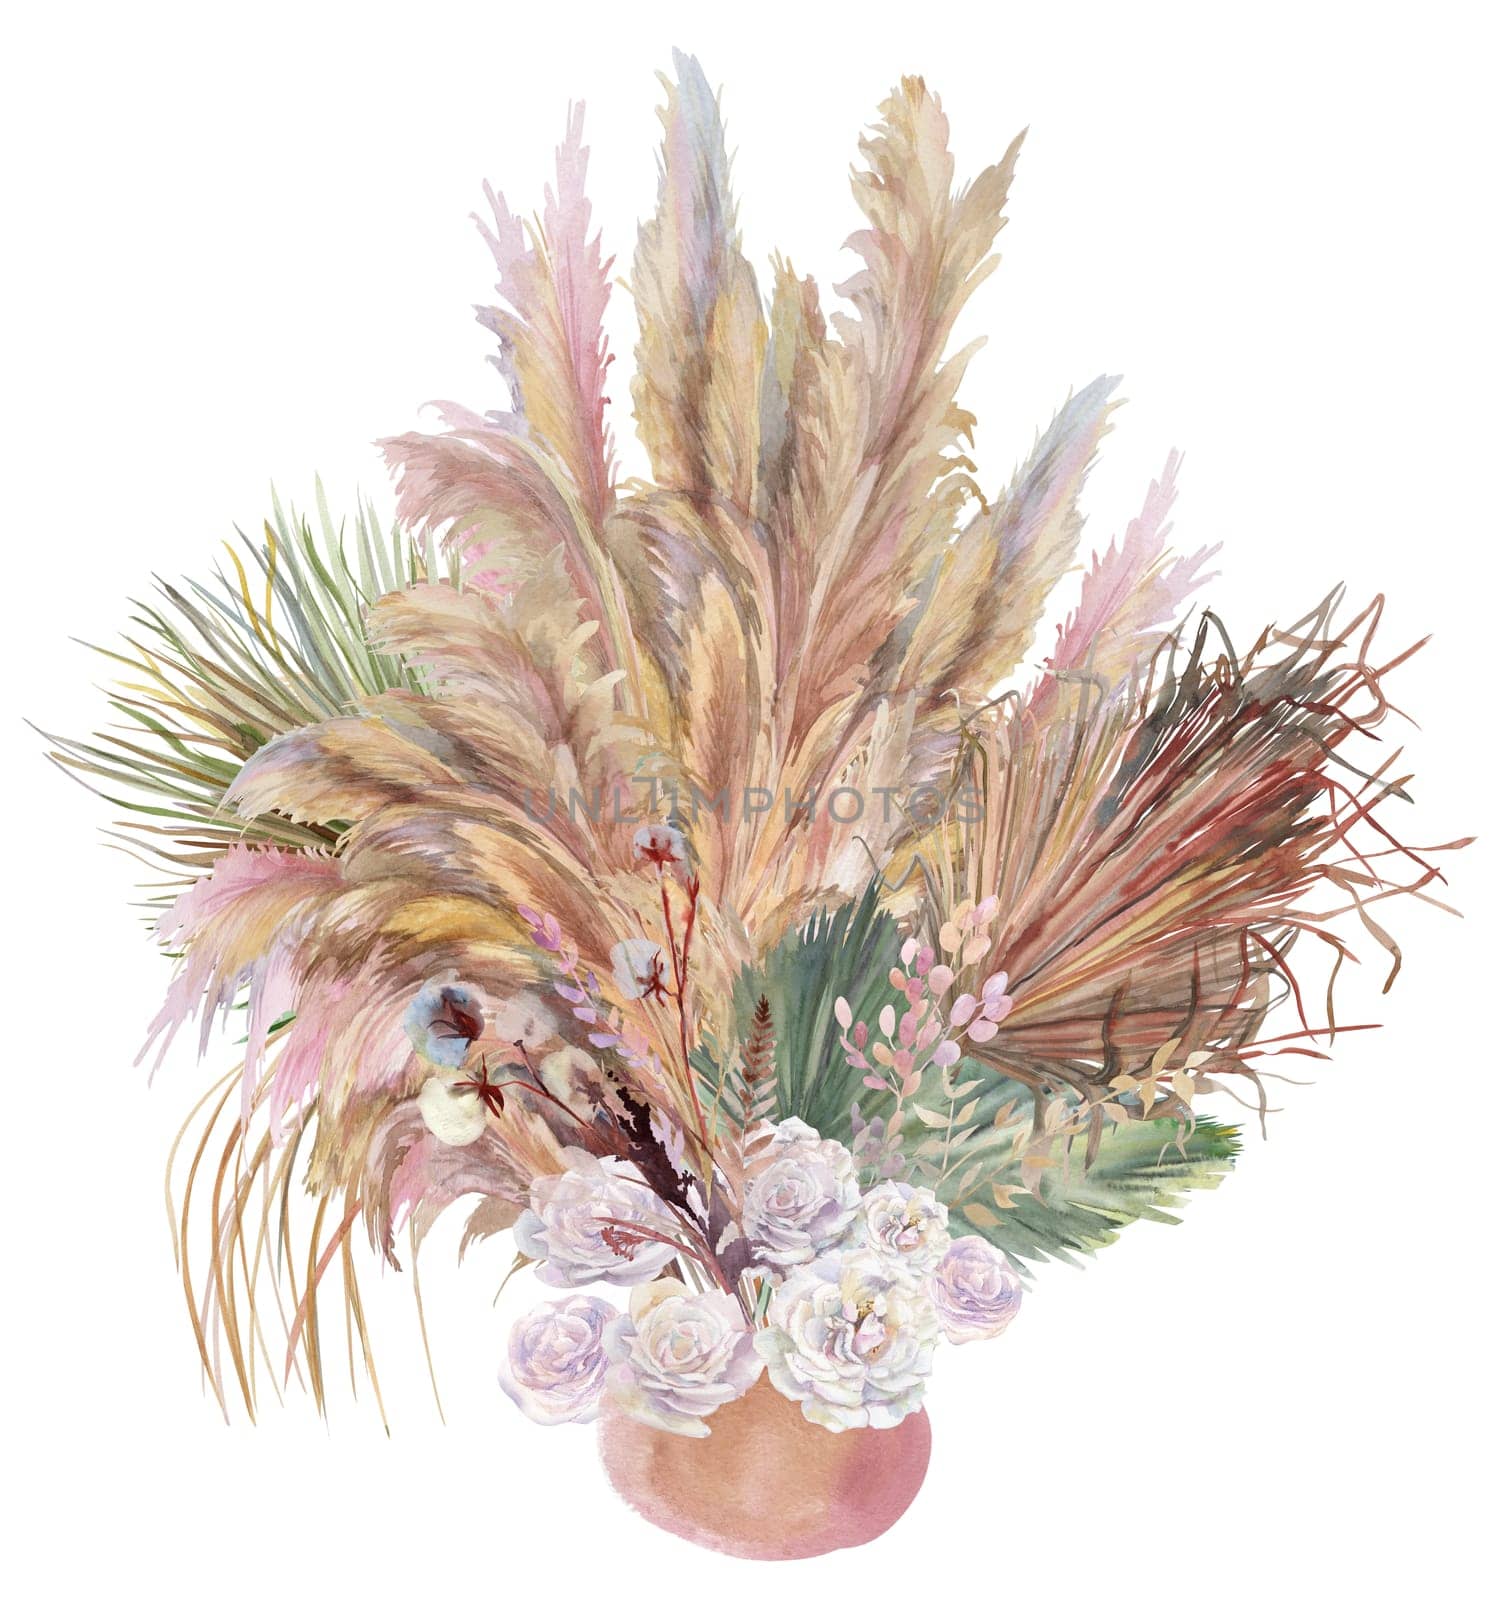 Watercolor vertical bouquet in a boho style vase with white rose flowers with pampas grass dried flowers and dalma sprigs